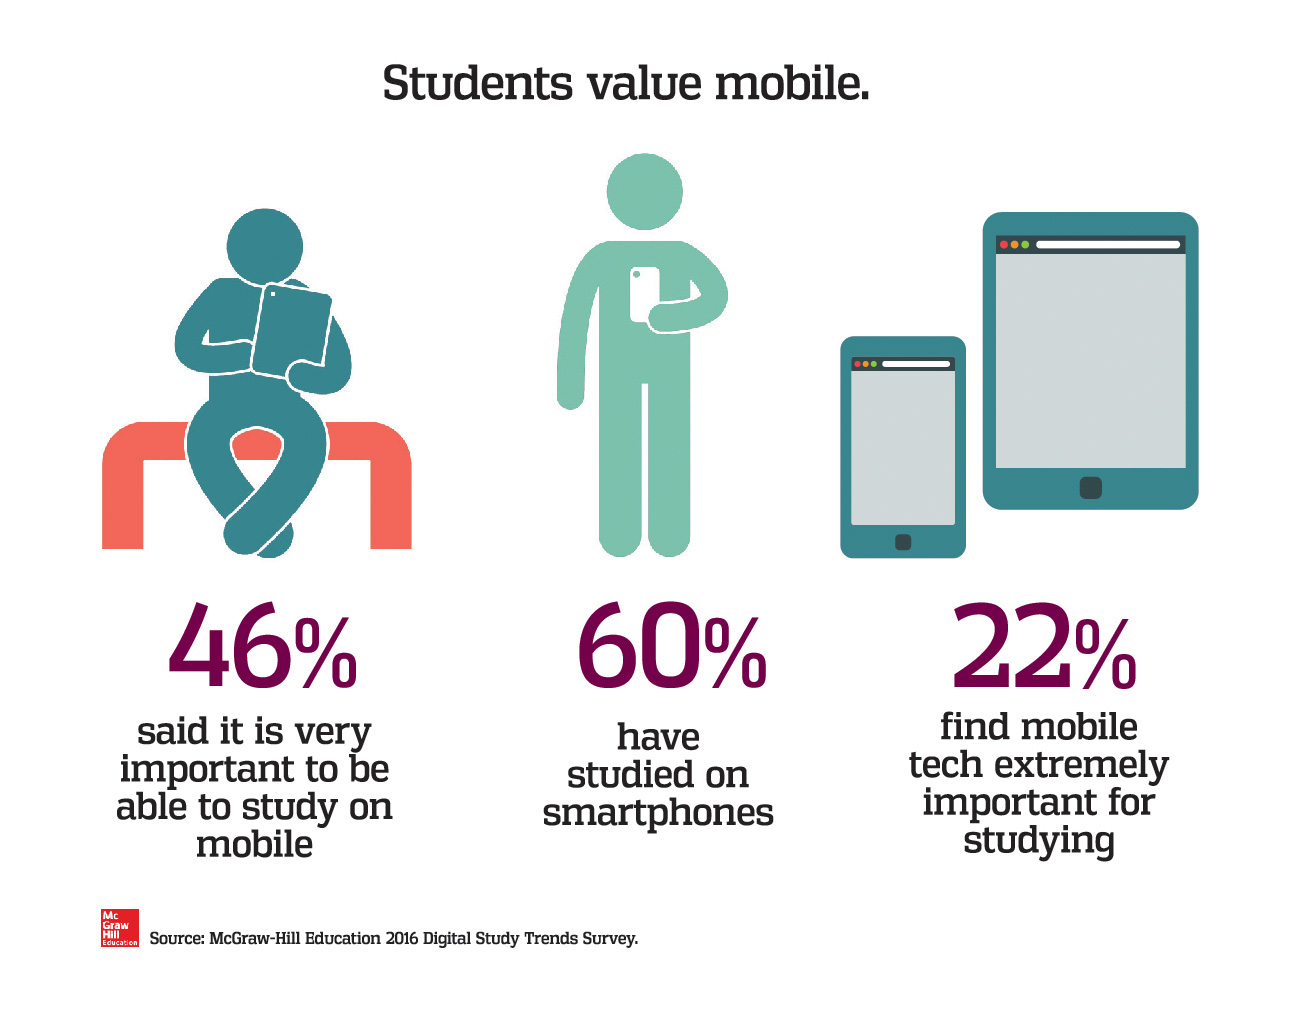 Student study habits and preferences today are increasingly digital and mobile.